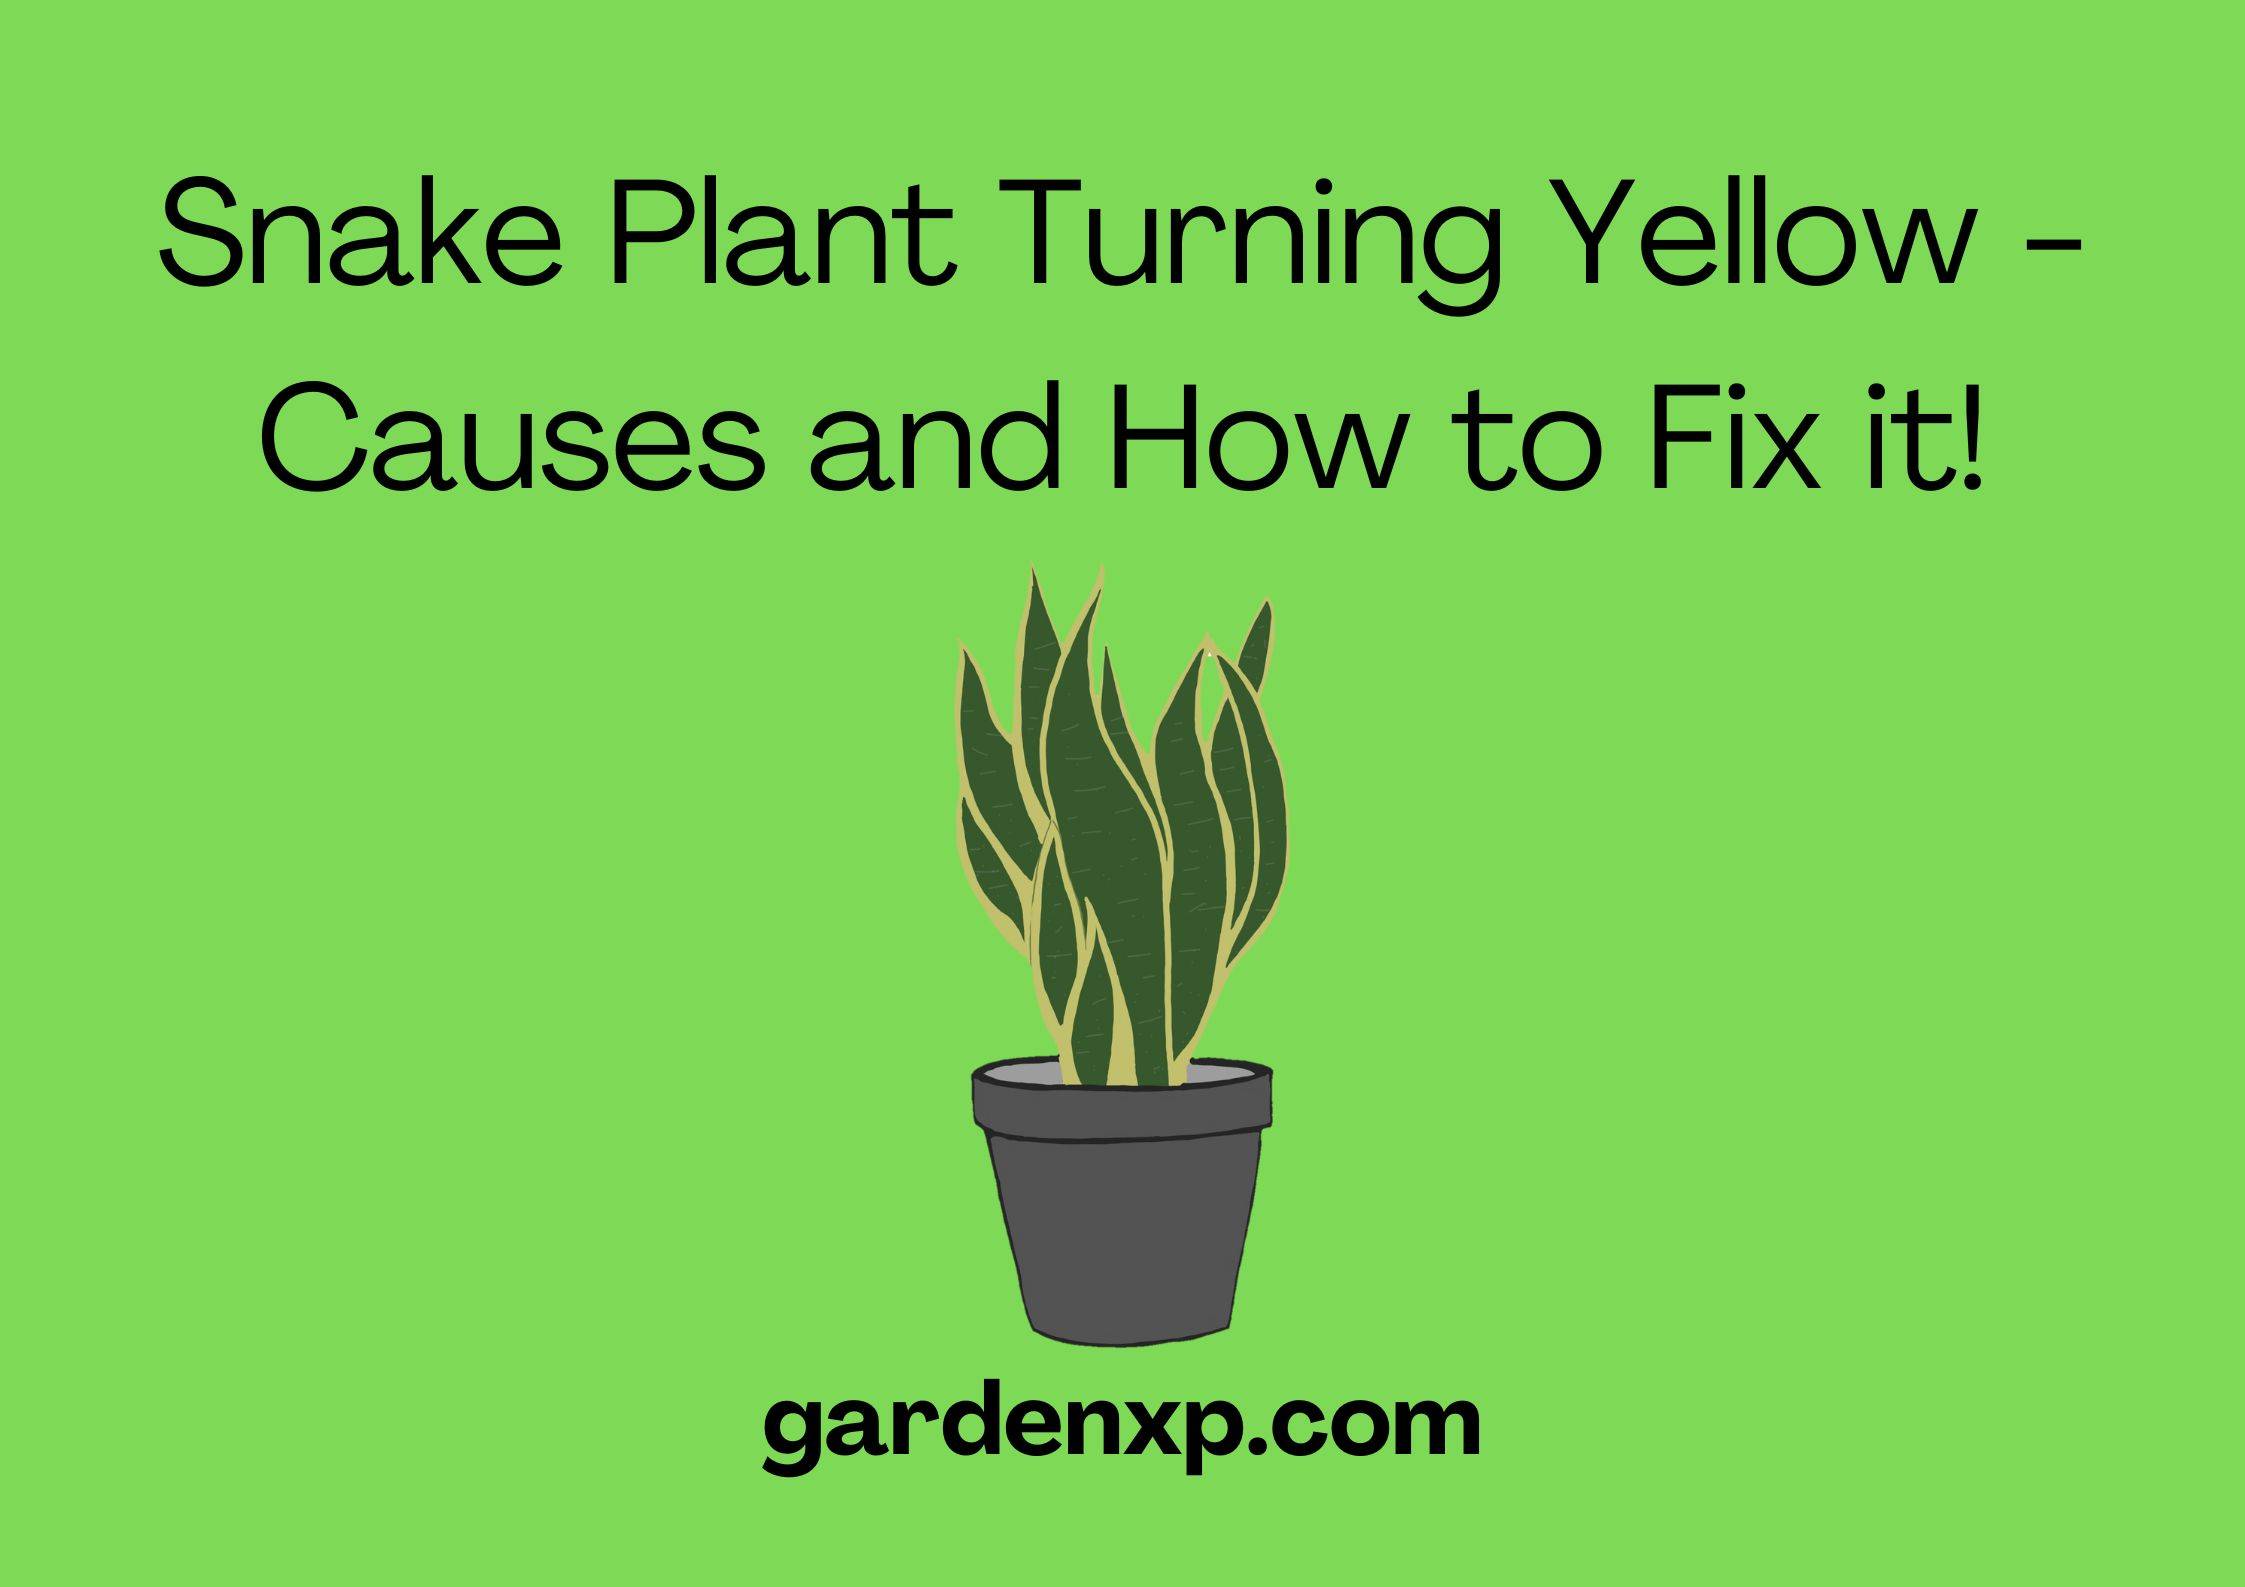 Snake Plant Turning Yellow - Causes and How to Fix it!